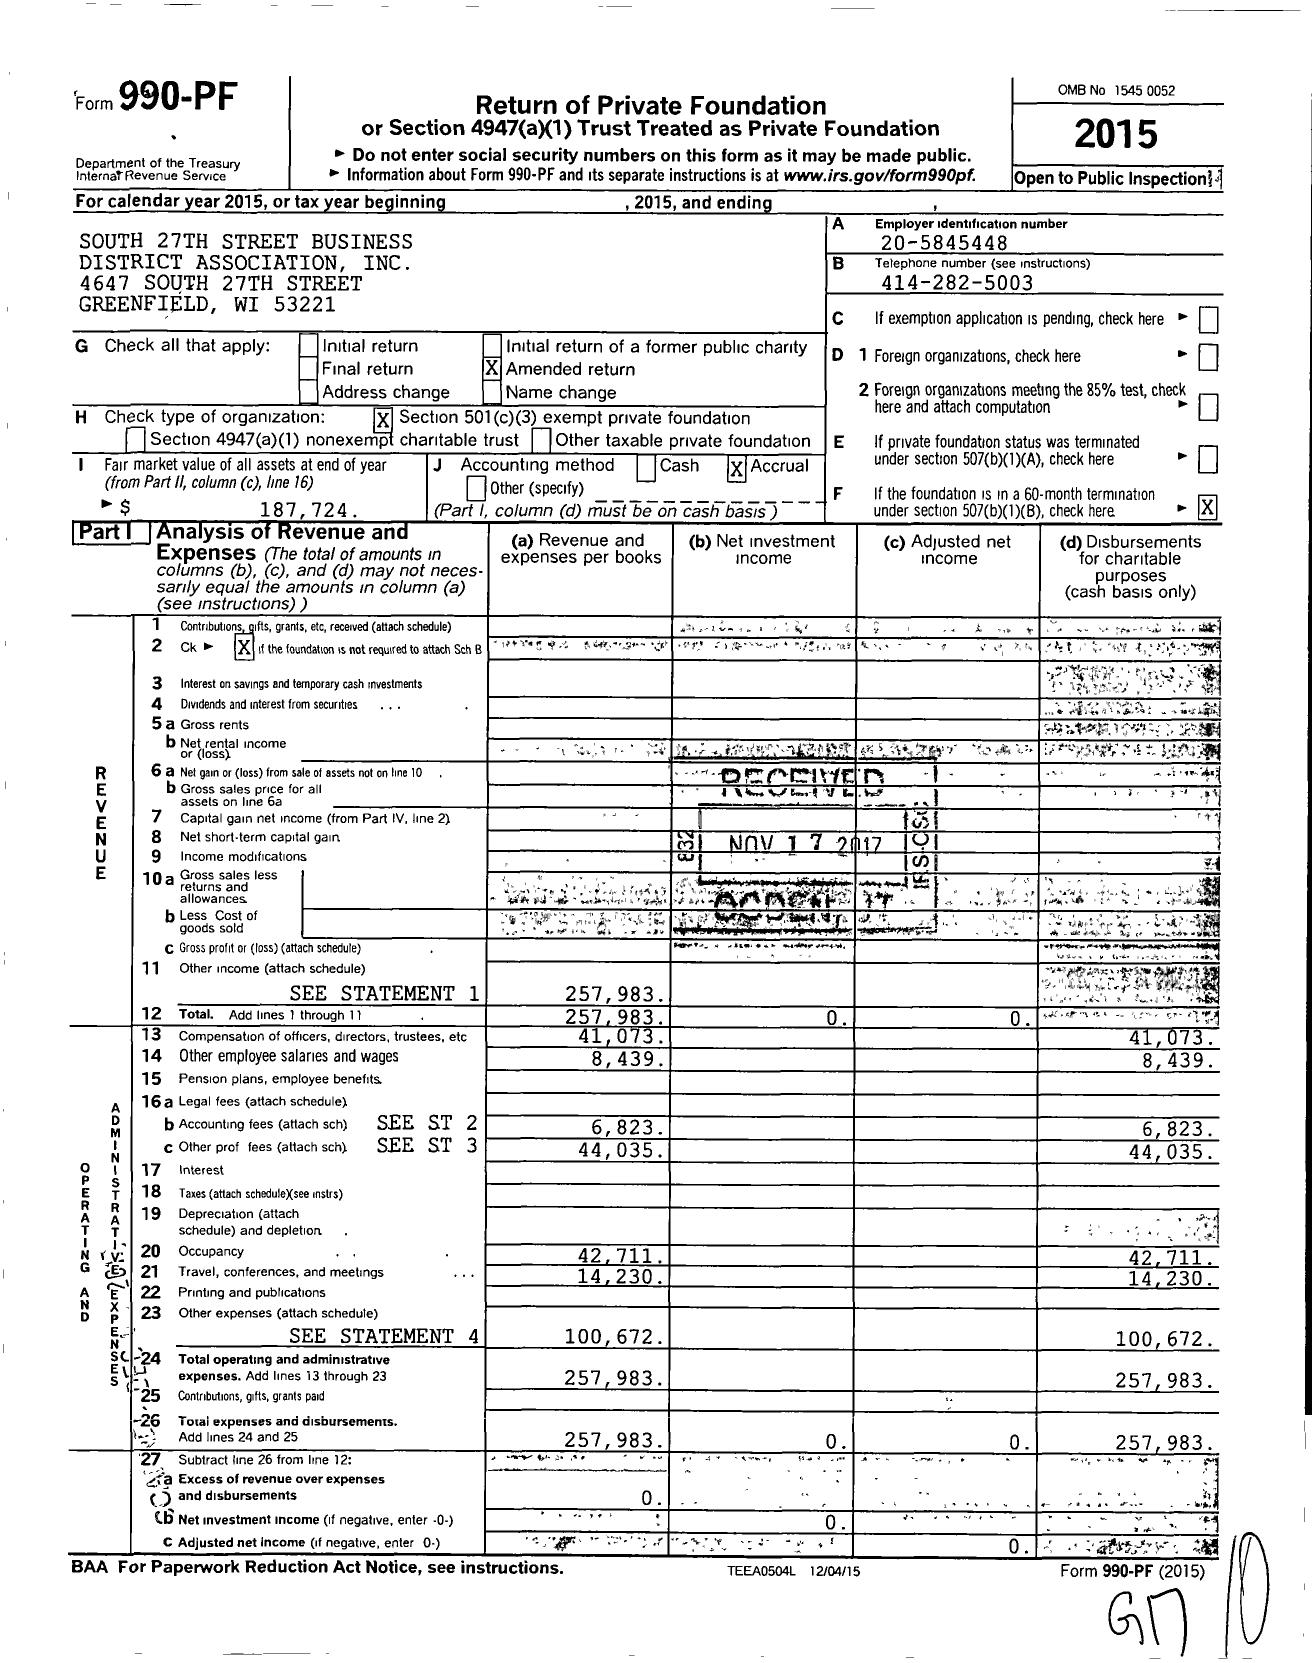 Image of first page of 2015 Form 990PF for South 27th Street Business District Association